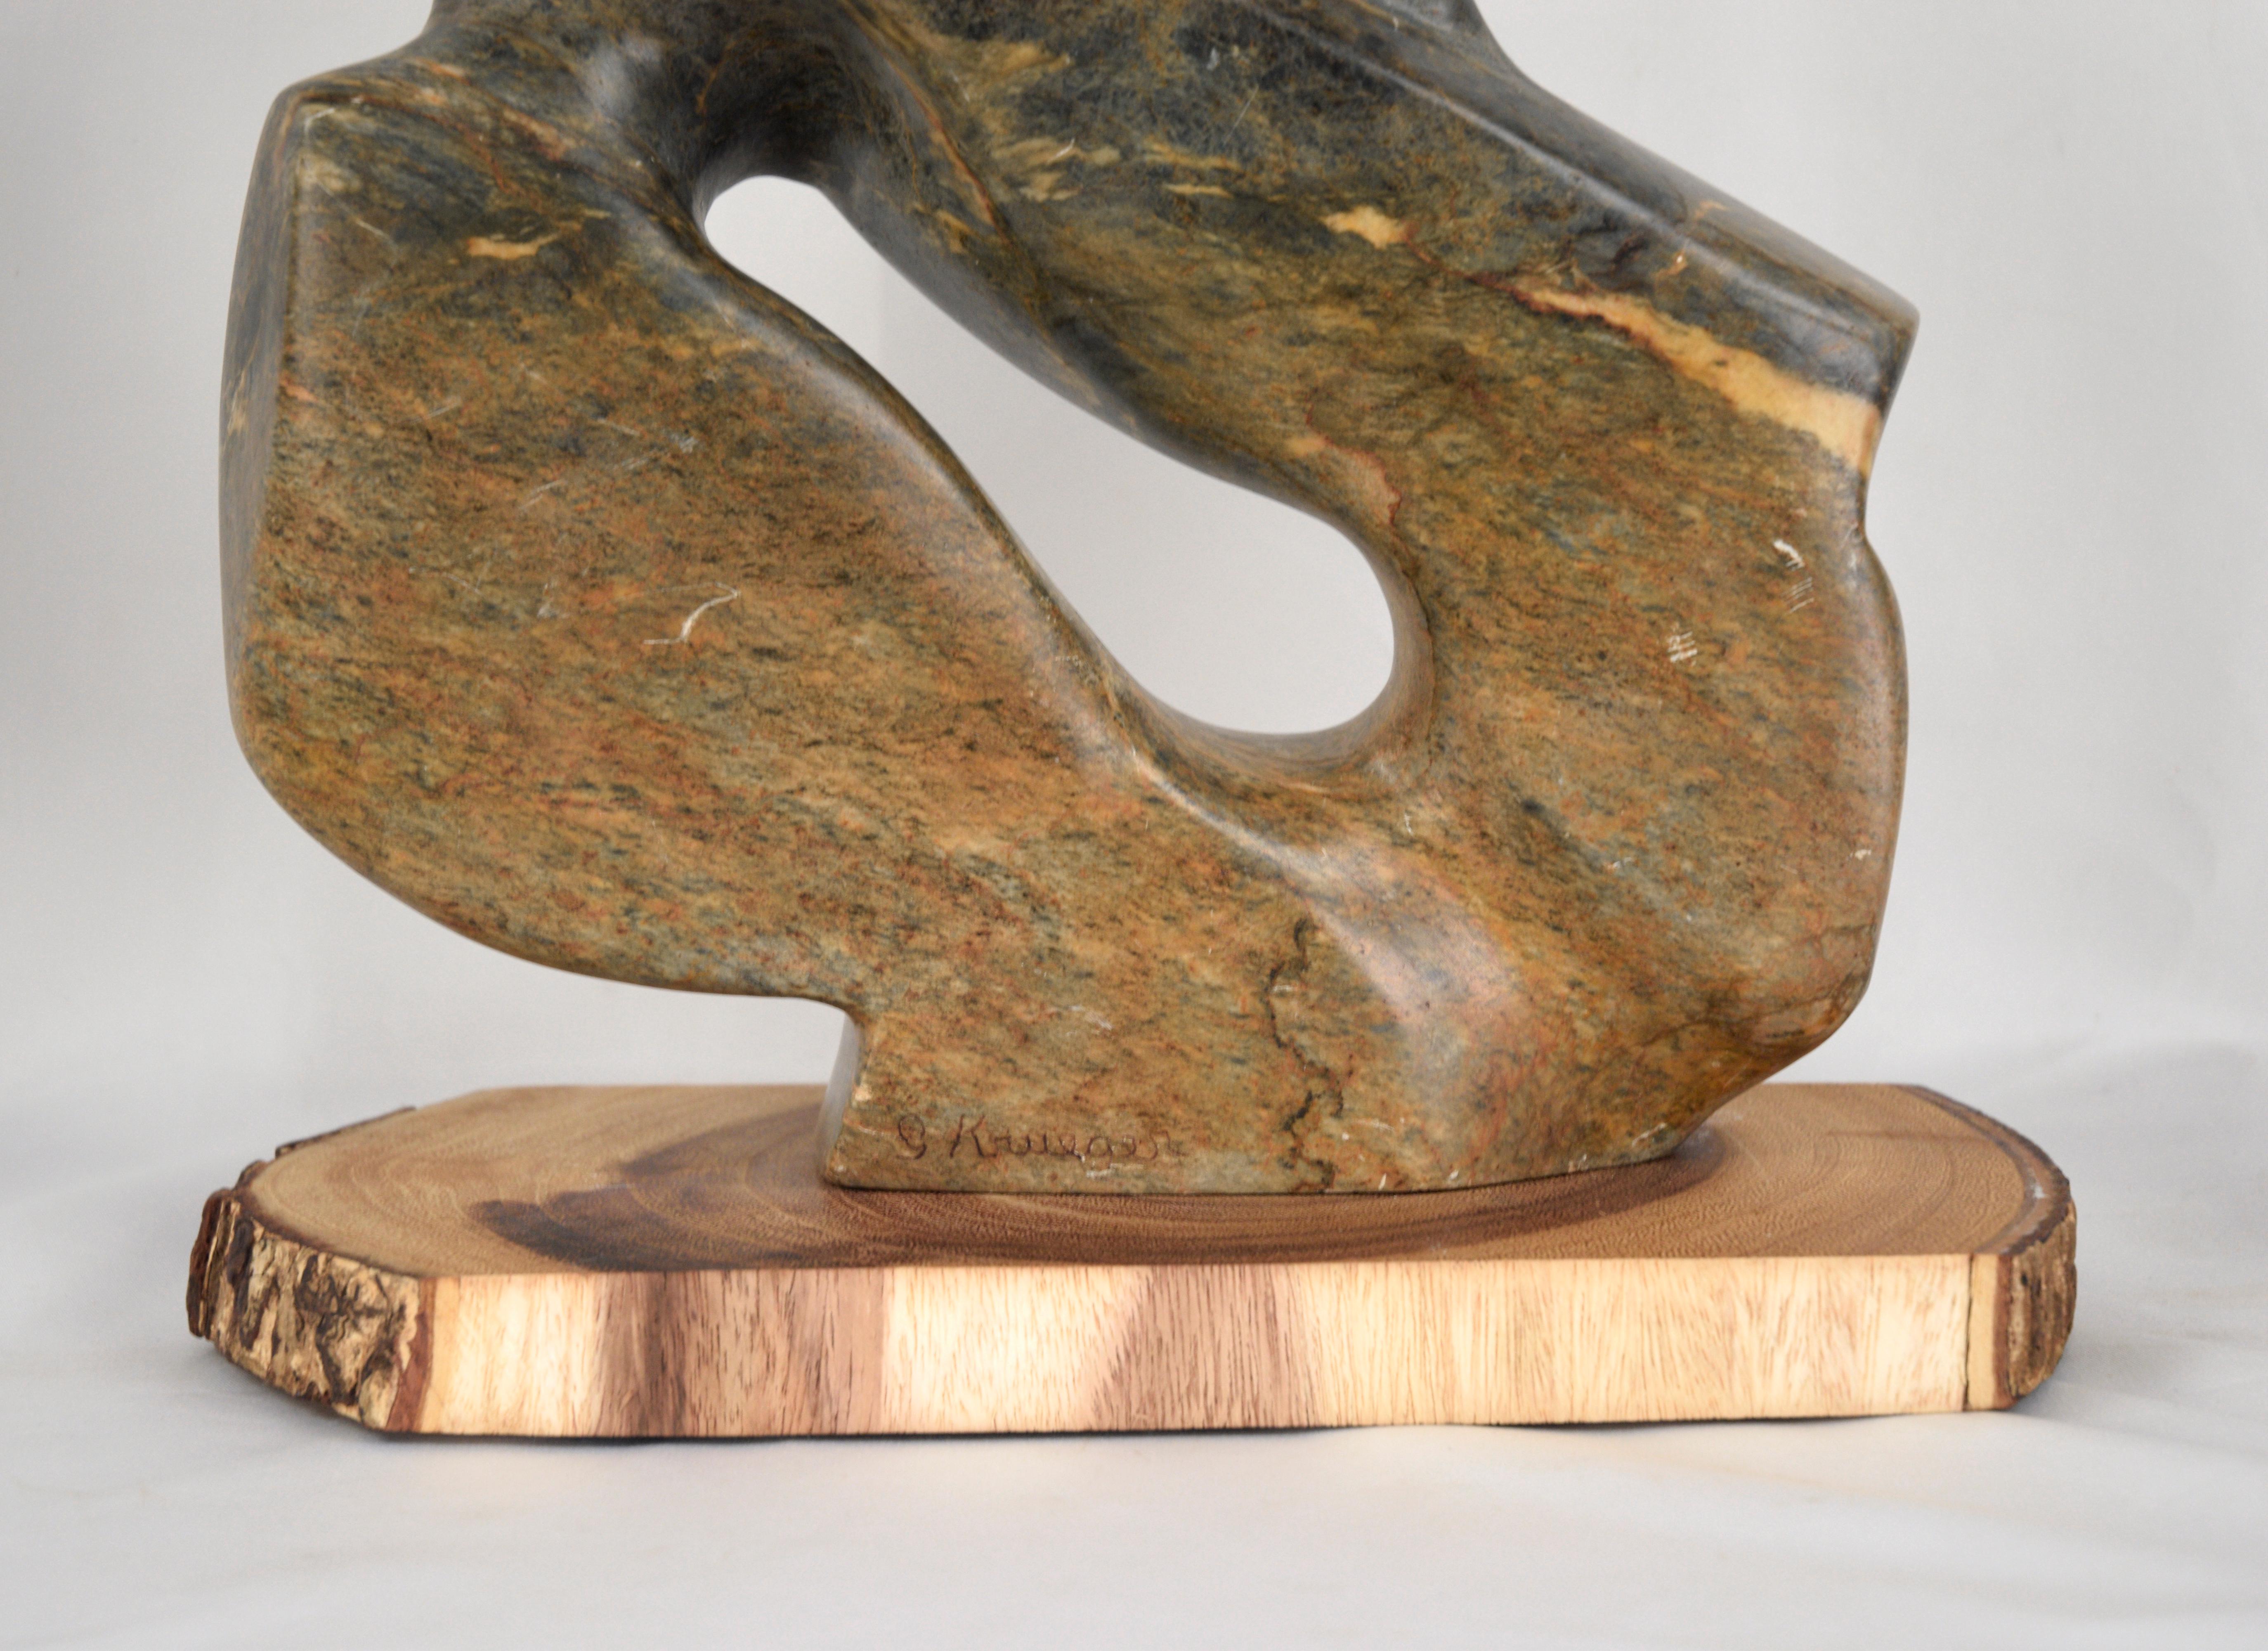 Organic abstract sculpture by G. Krueger. The Serpentine stone has gorgeous earth-toned green, yellow, and orange hues, sculpted into a flowing shape in the style of Herman Miller Sculptures. 

Wood pedestal measures 1